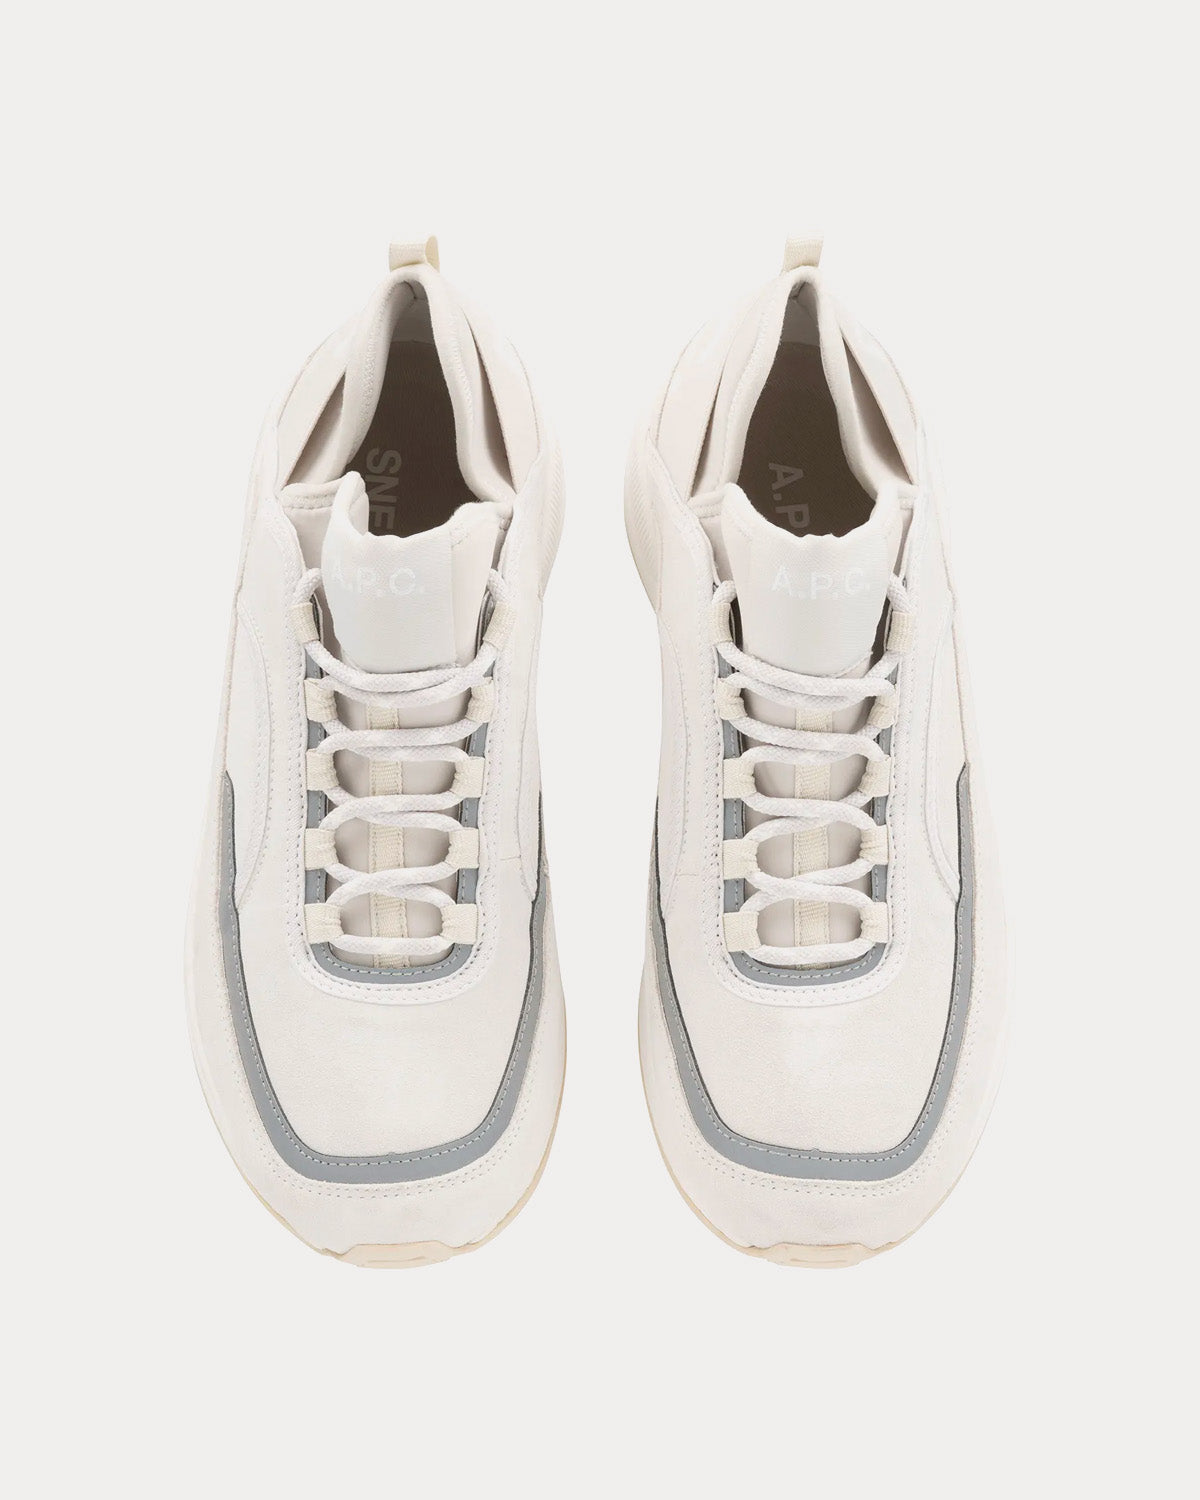 A.P.C. - Run Around Pale Grey Low Top Sneakers